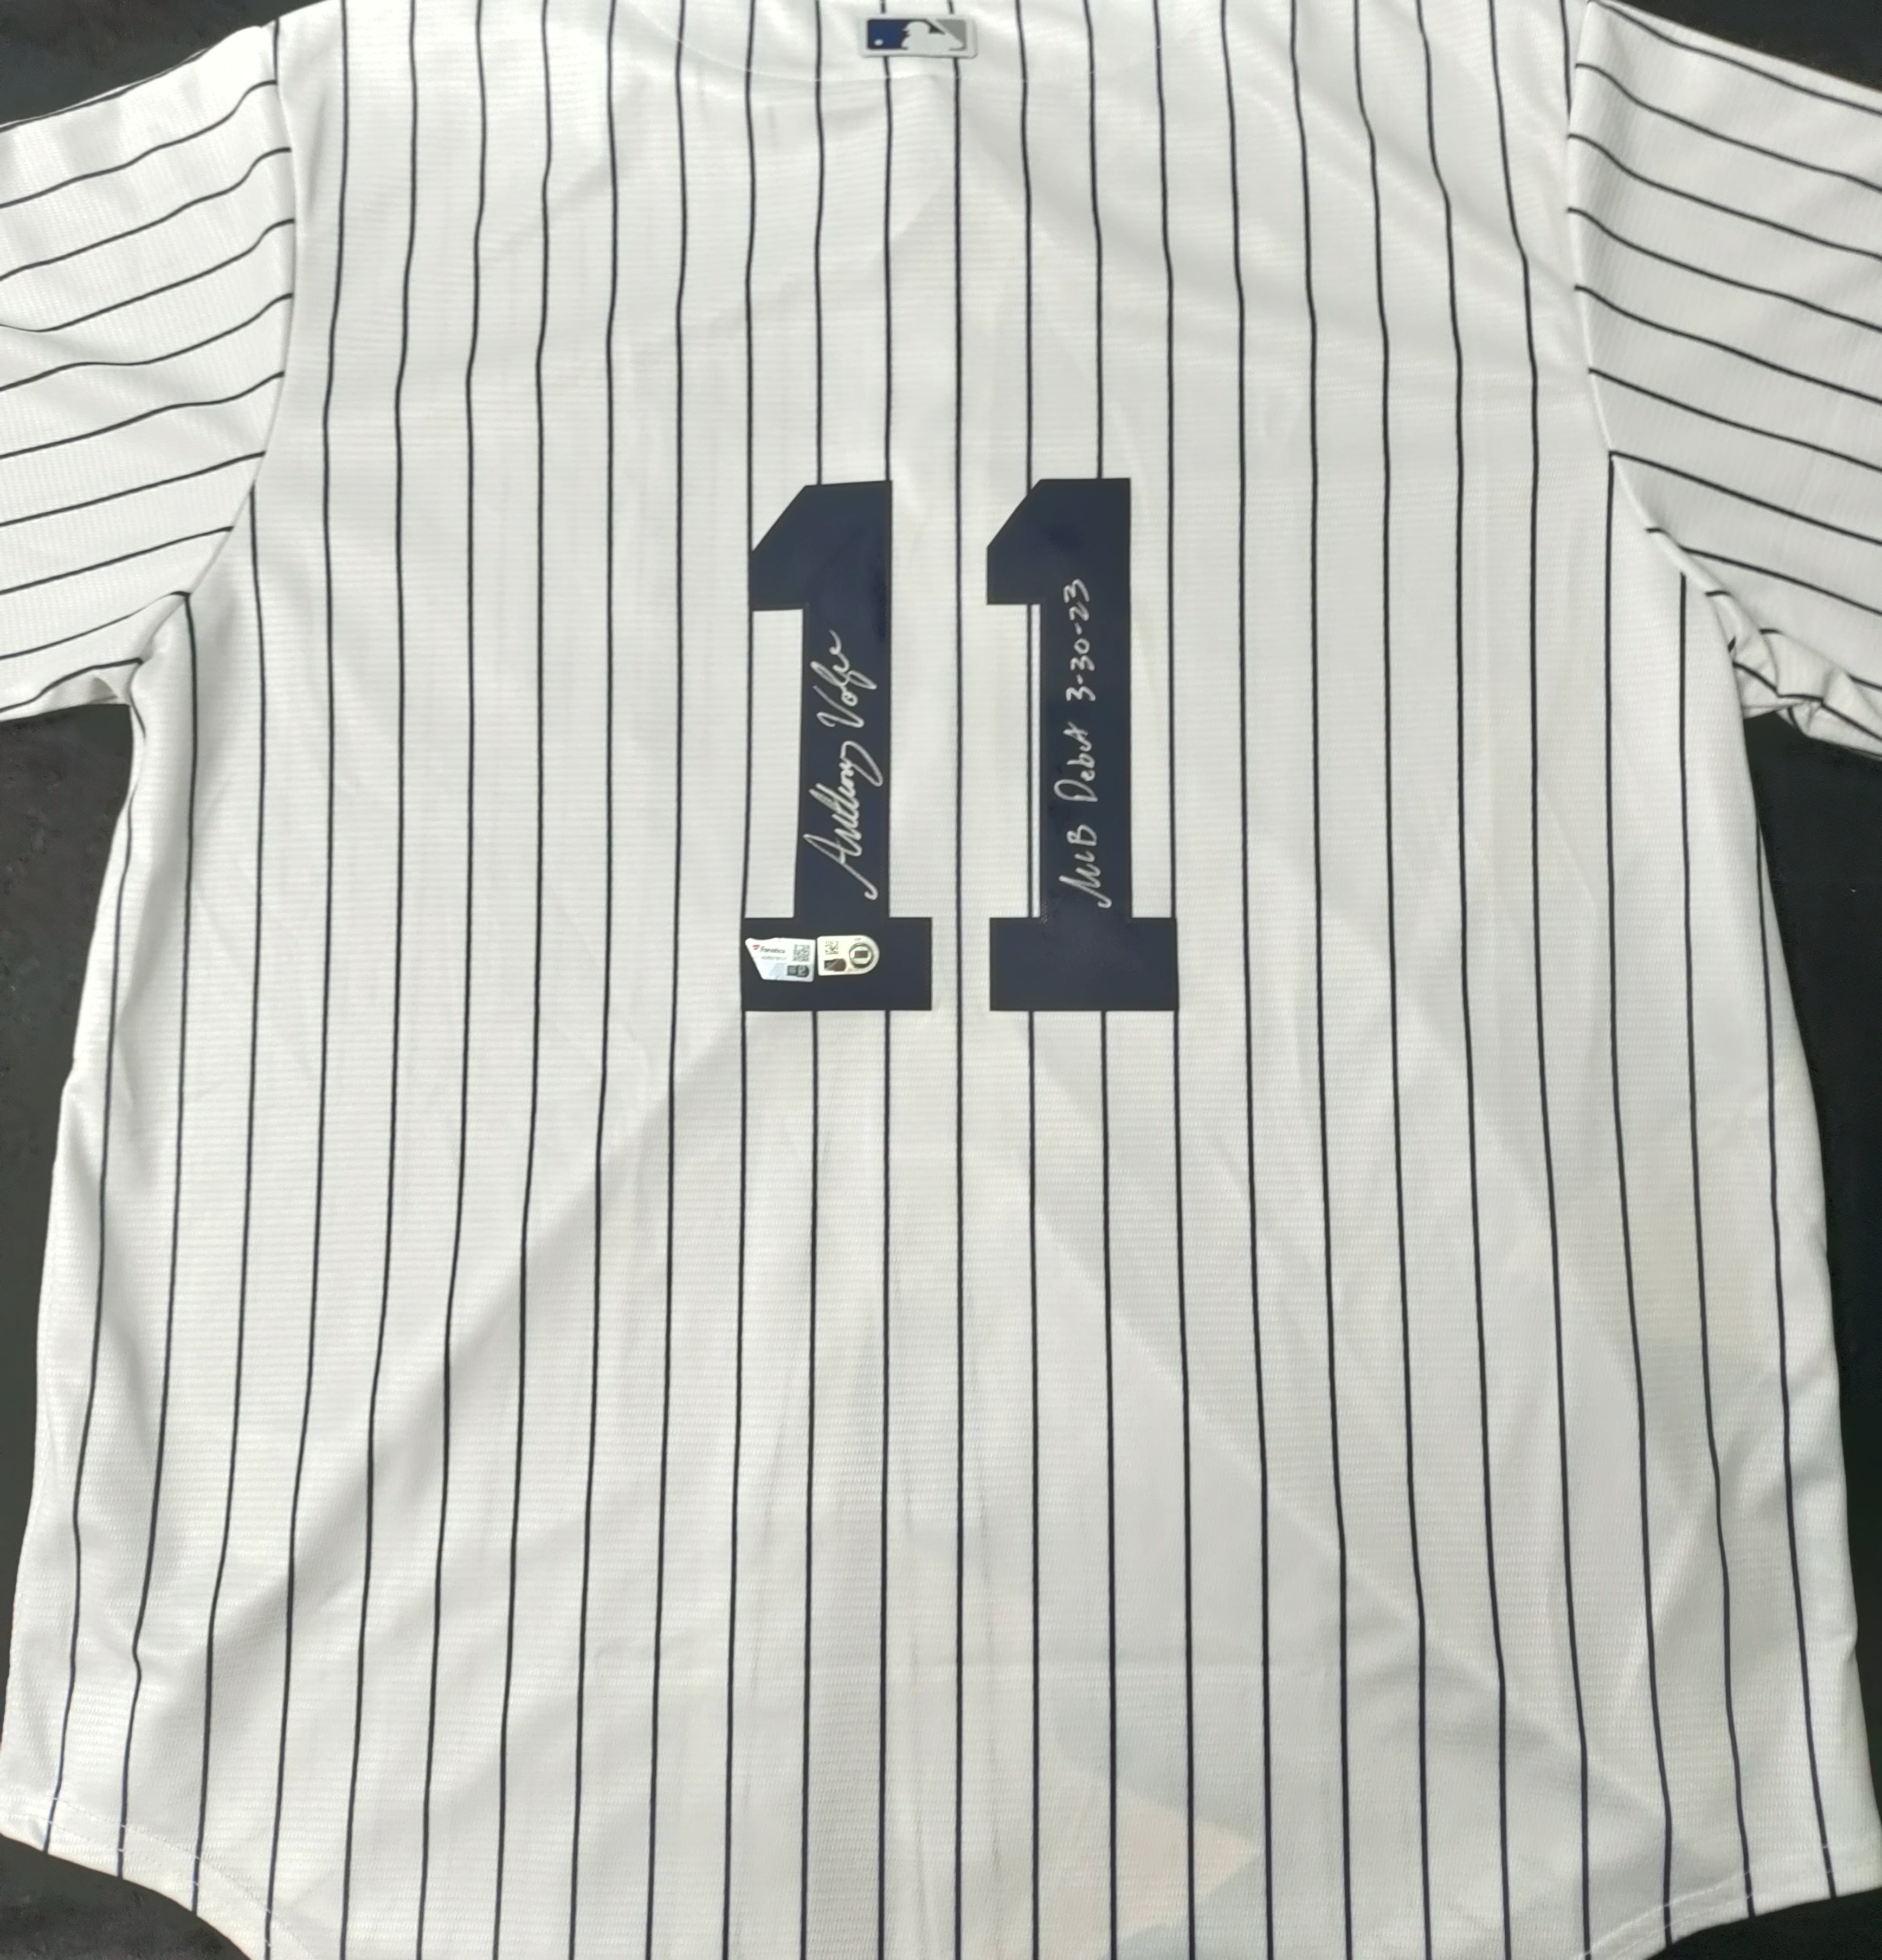 Yankees Jersey Number 3 